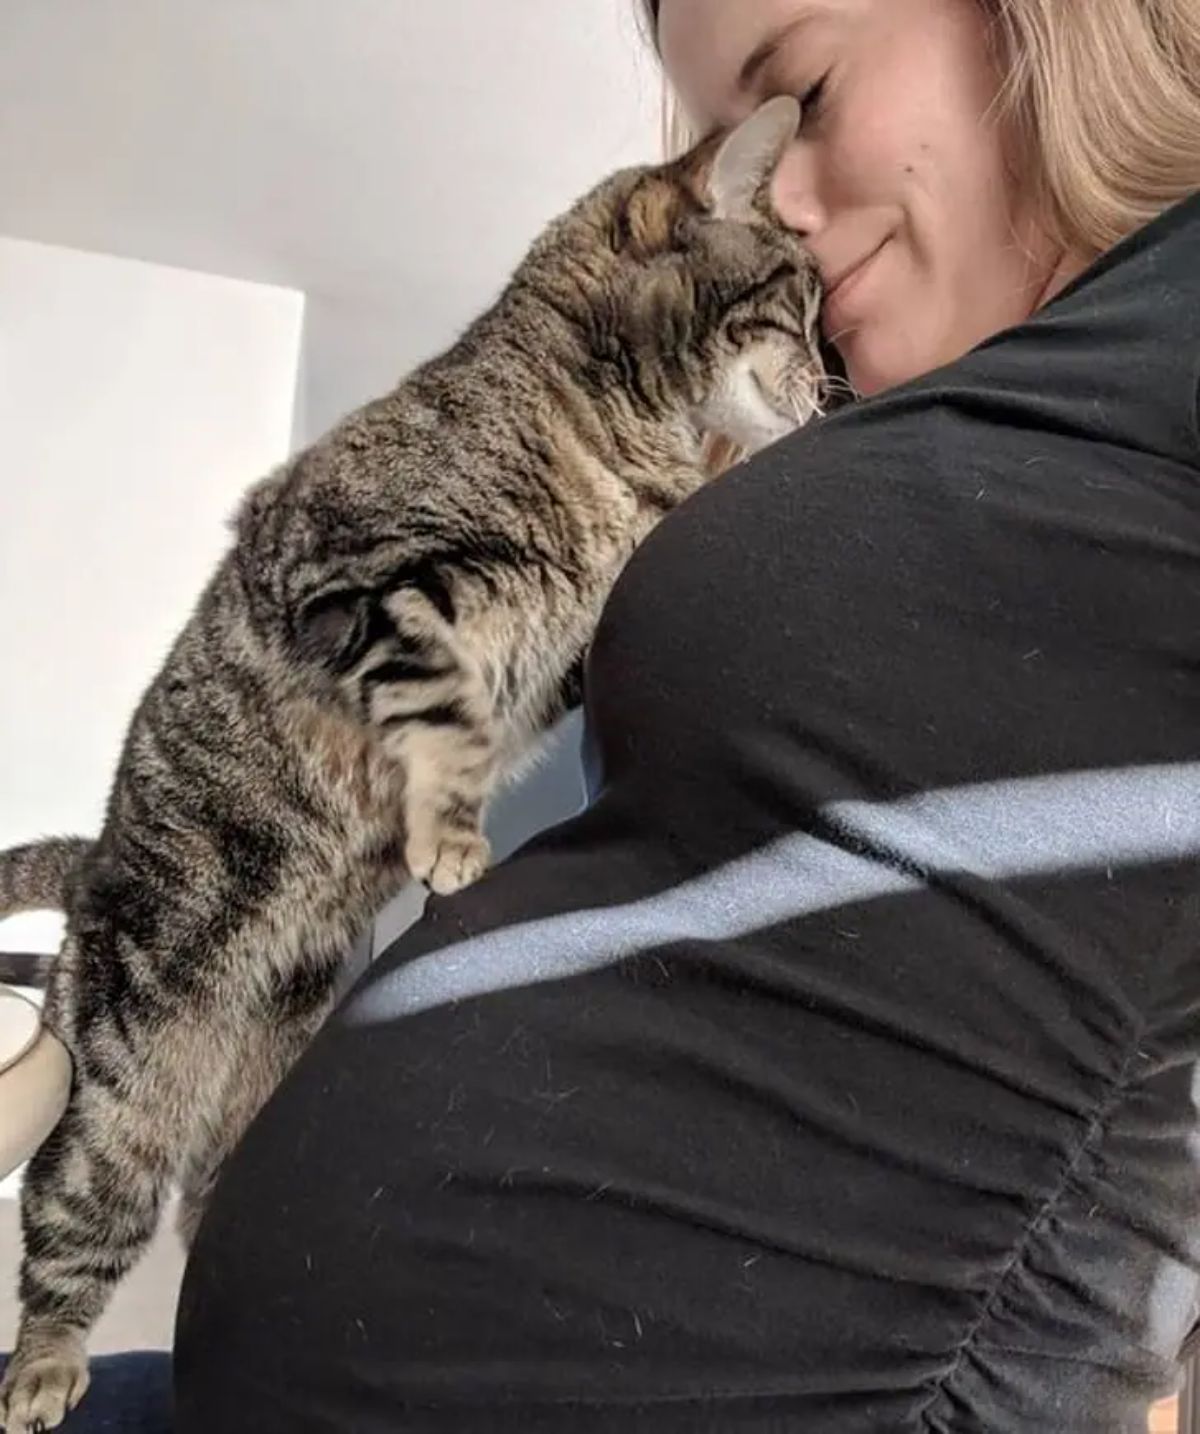 brown tabby cat standing on hind legs and nuzzling with a pregnant person